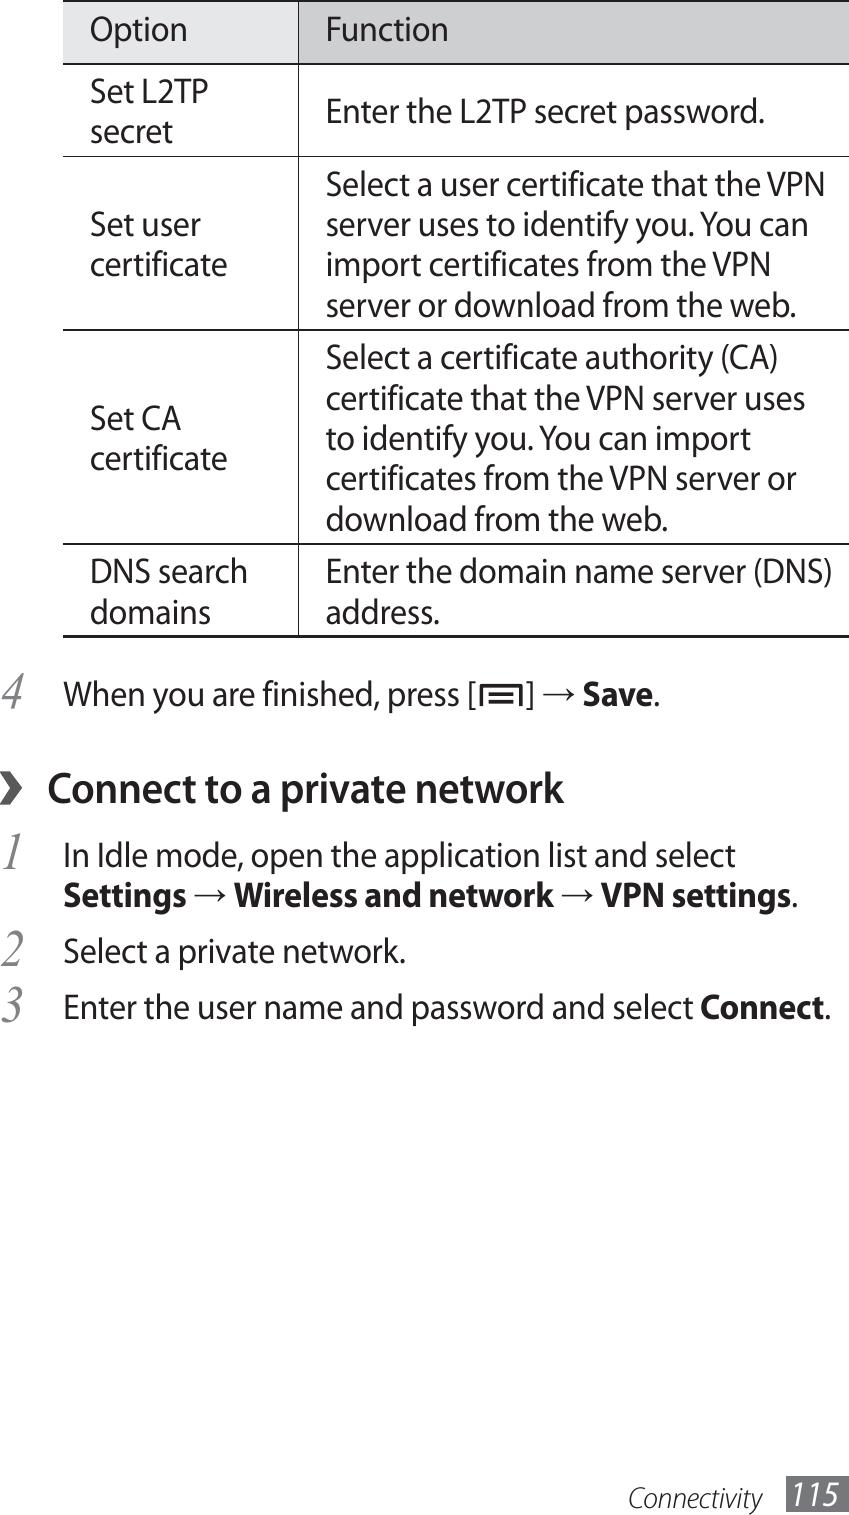 Connectivity 115Option FunctionSet L2TP secret Enter the L2TP secret password.Set user certificateSelect a user certificate that the VPN server uses to identify you. You can import certificates from the VPN server or download from the web.Set CA certificateSelect a certificate authority (CA) certificate that the VPN server uses to identify you. You can import certificates from the VPN server or download from the web.DNS search domainsEnter the domain name server (DNS) address.When you are finished, press [4 ] → Save.Connect to a private network ›In Idle mode, open the application list and select 1 Settings → Wireless and network → VPN settings.Select a private network.2 Enter the user name and password and select 3 Connect.